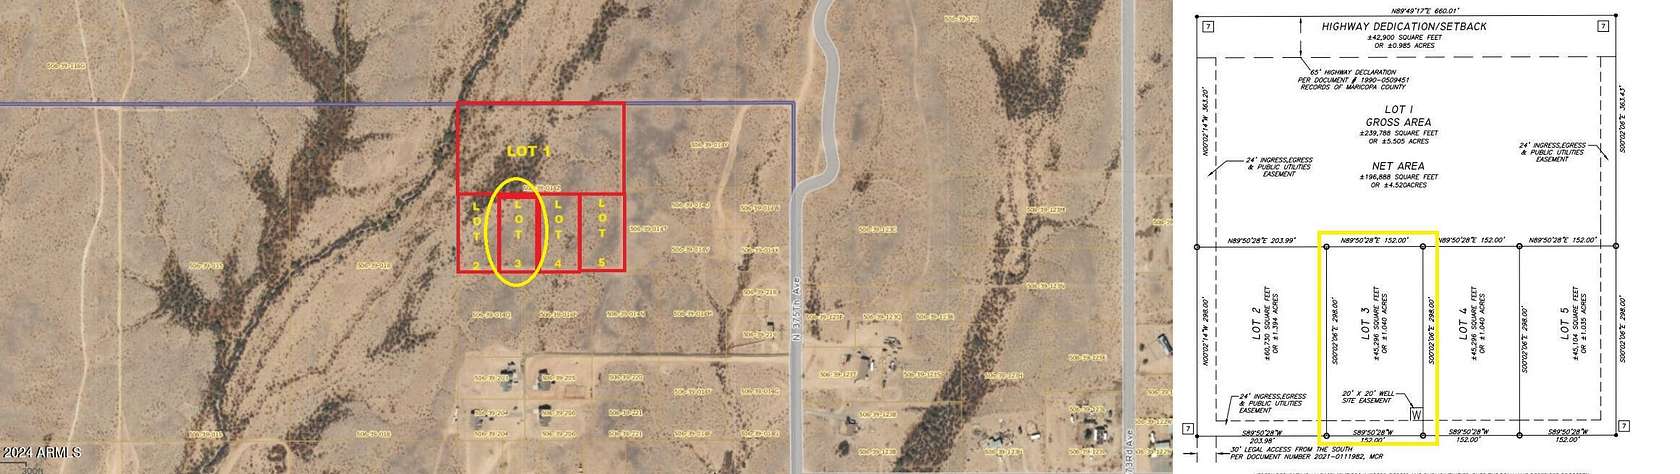 1 Acre of Mixed-Use Land for Sale in Tonopah, Arizona